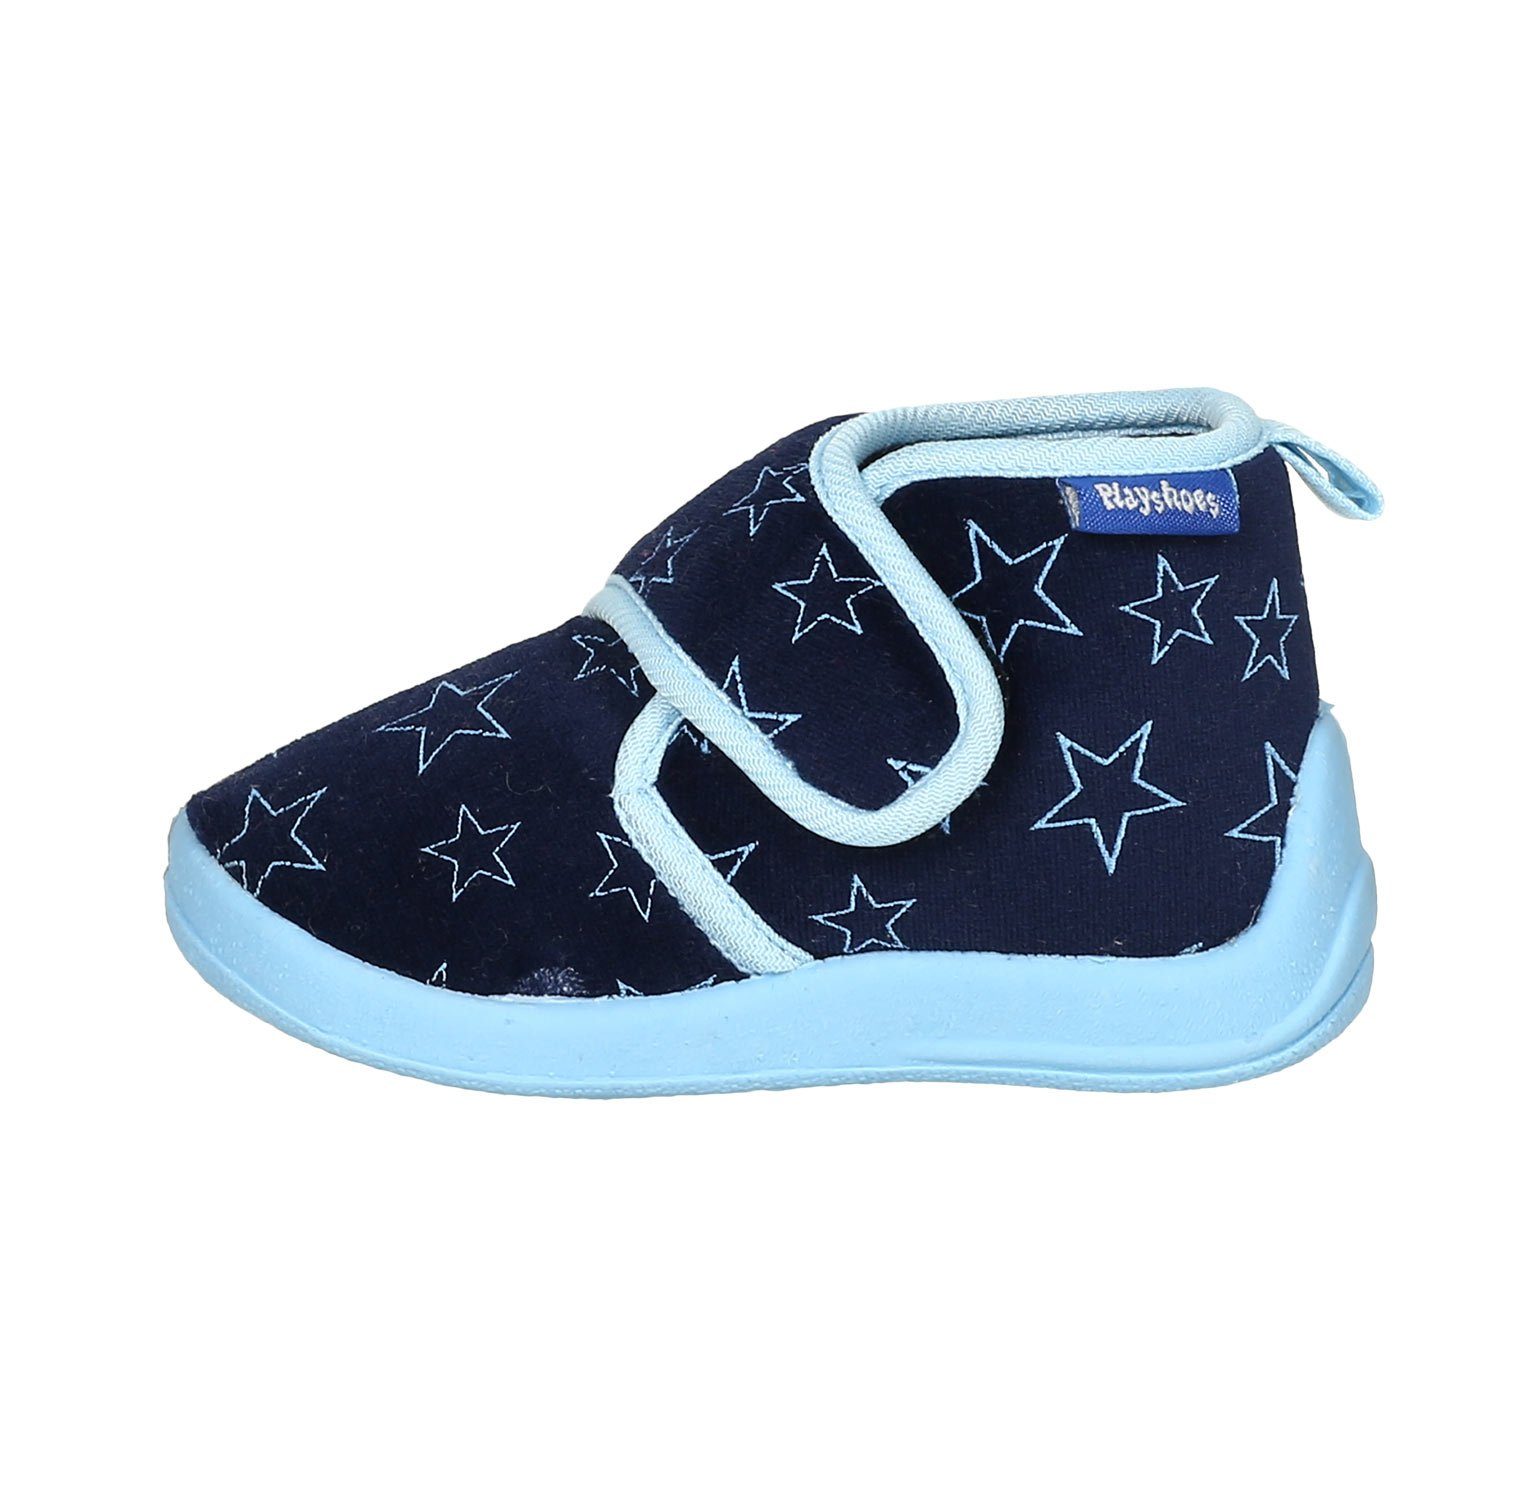 Playshoes Hausschuh Pastell Hausschuh Marine